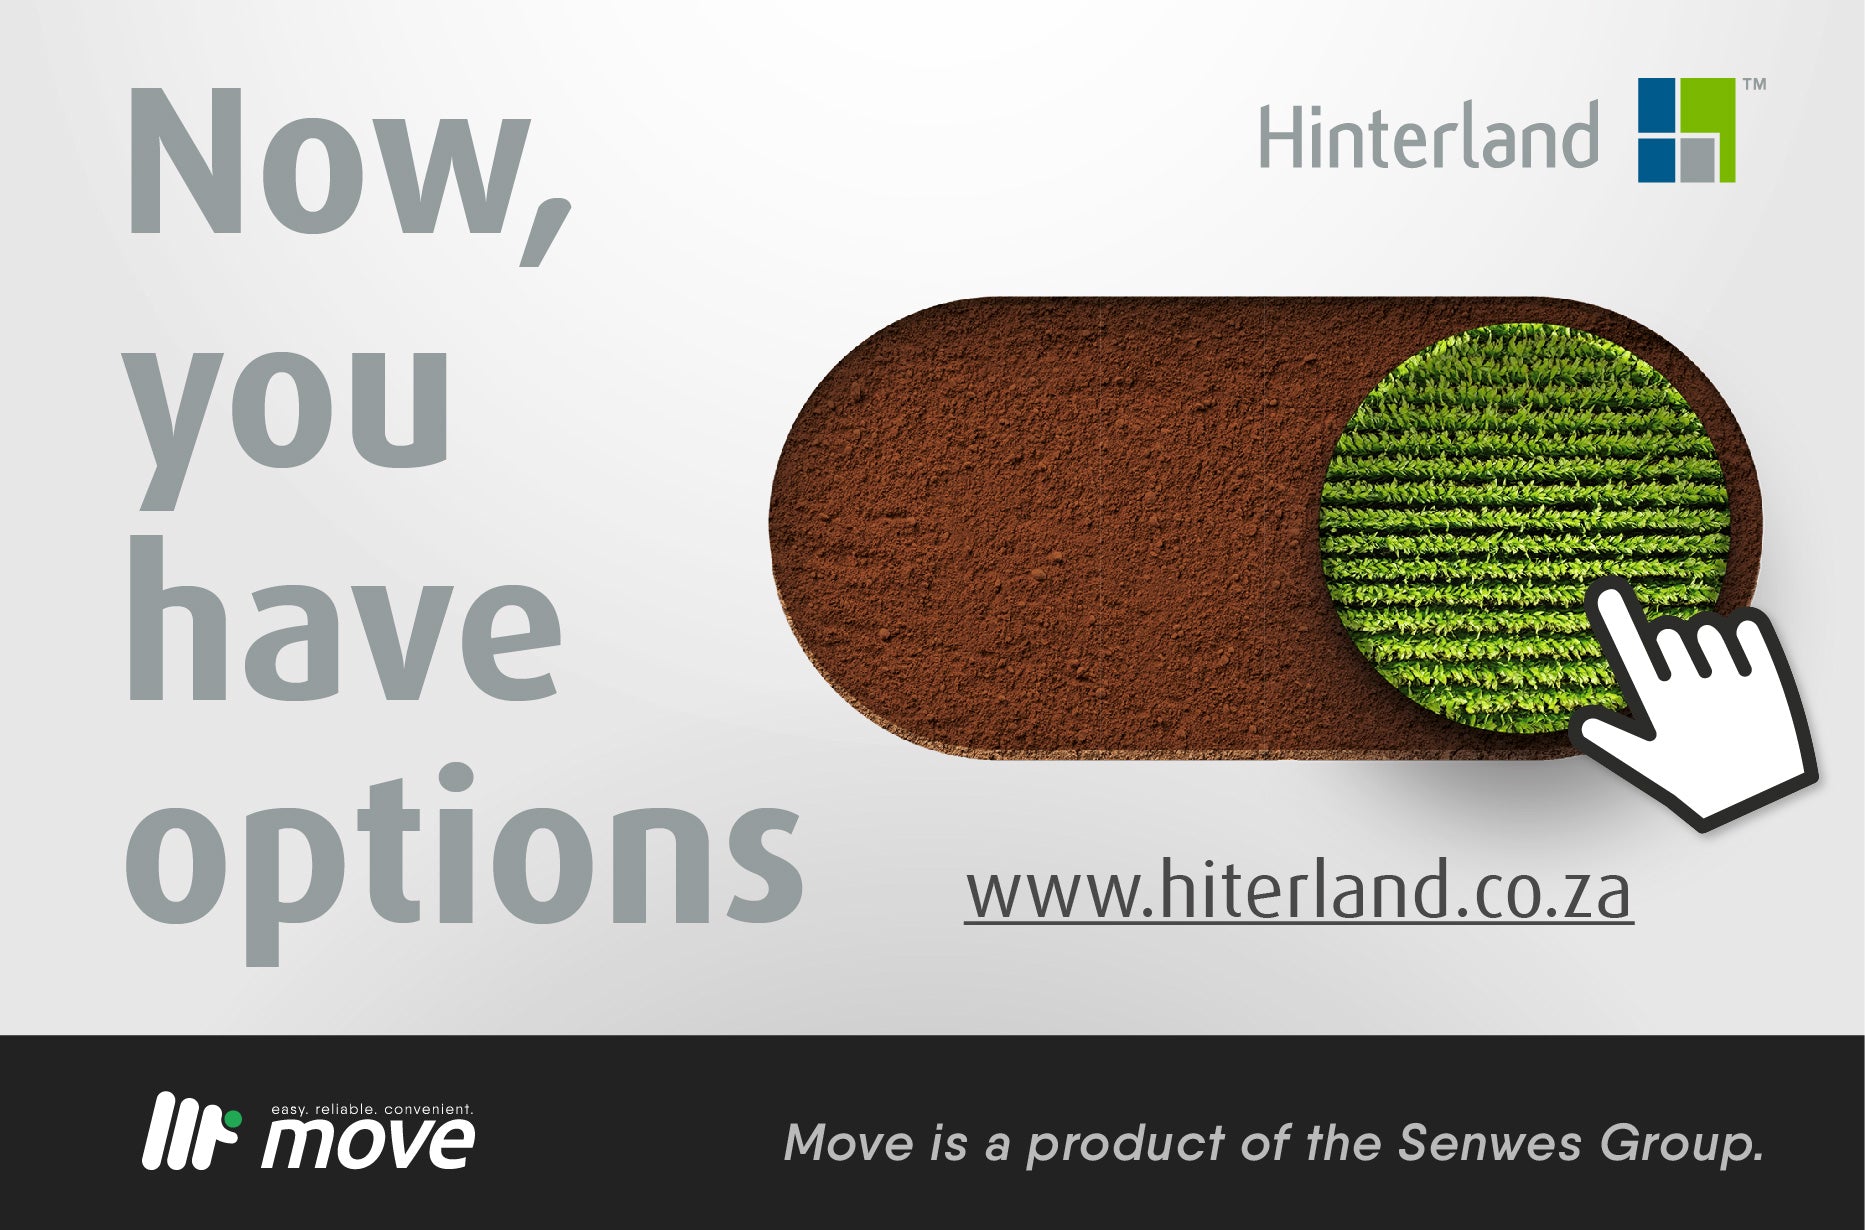 Explore Hinterland's Agricultural Ecommerce Adventure, Powered by Move